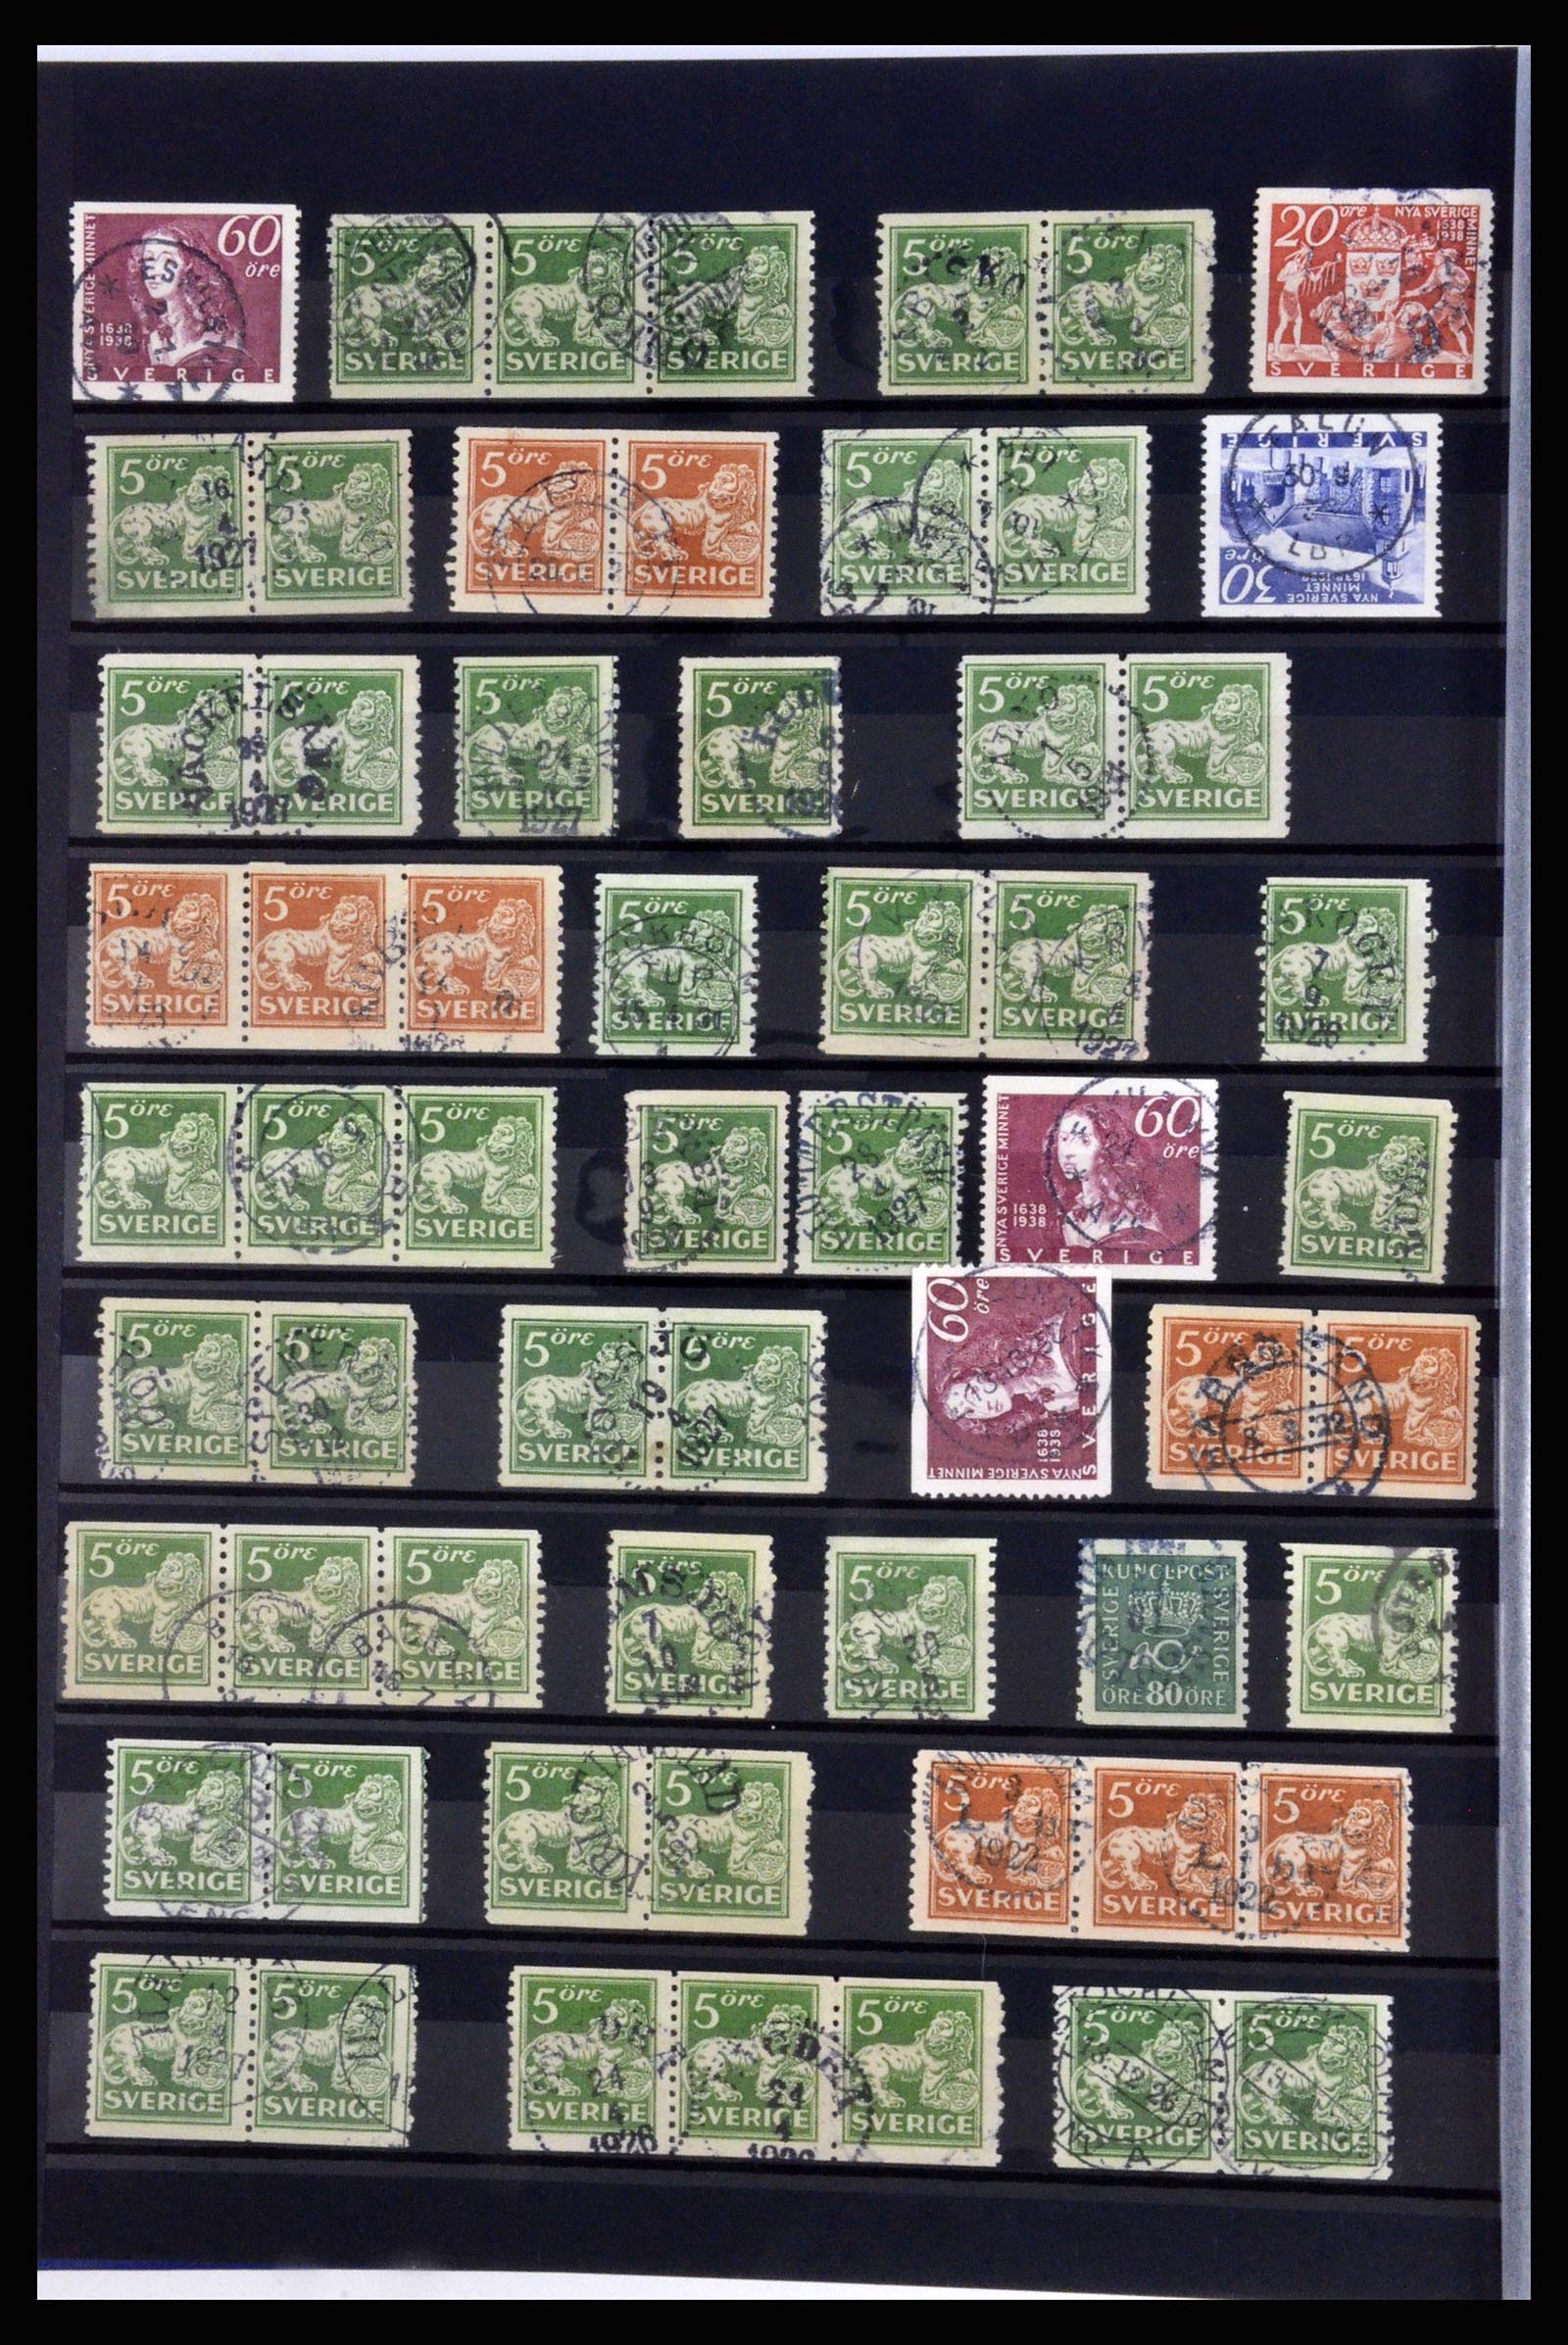 36316 020 - Stamp collection 36316 Sweden cancellations 1920-1938.